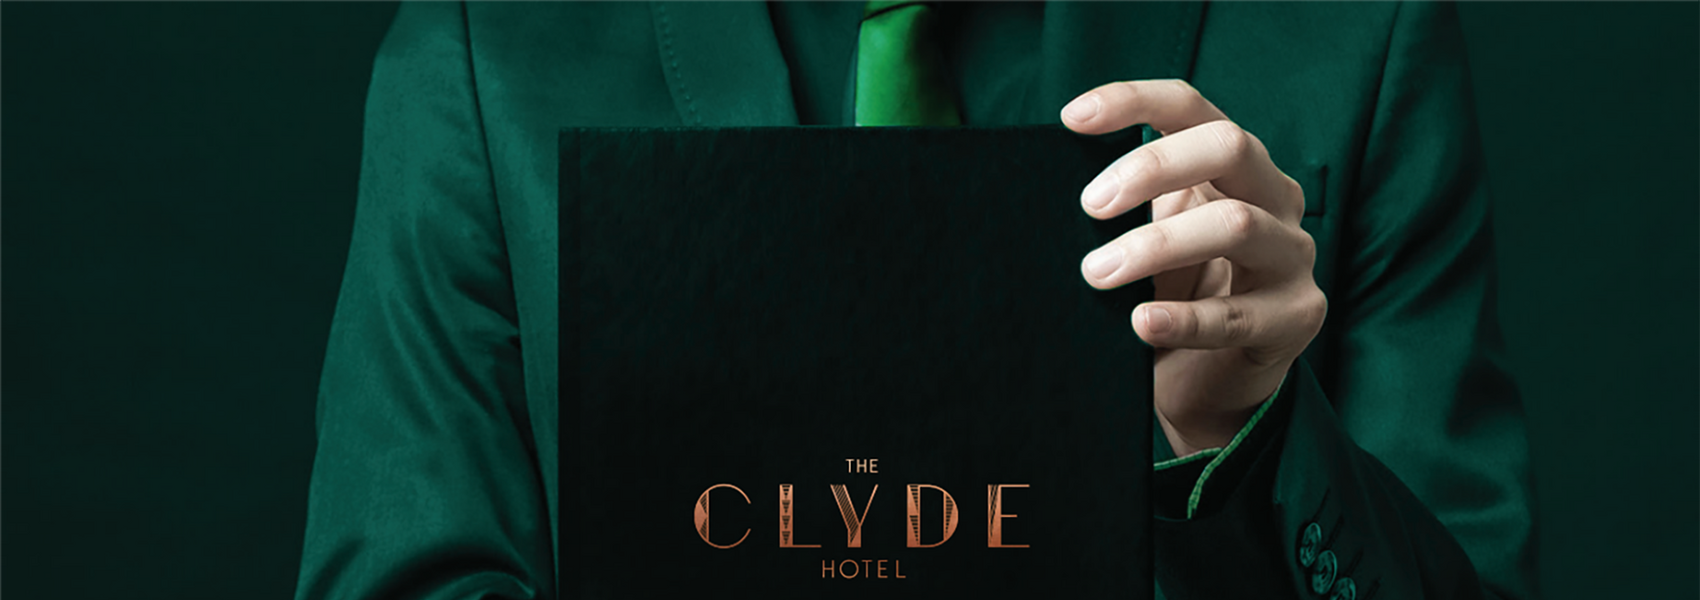 Man in green suite with hand holding book embossed with The Clyde Hotel logo